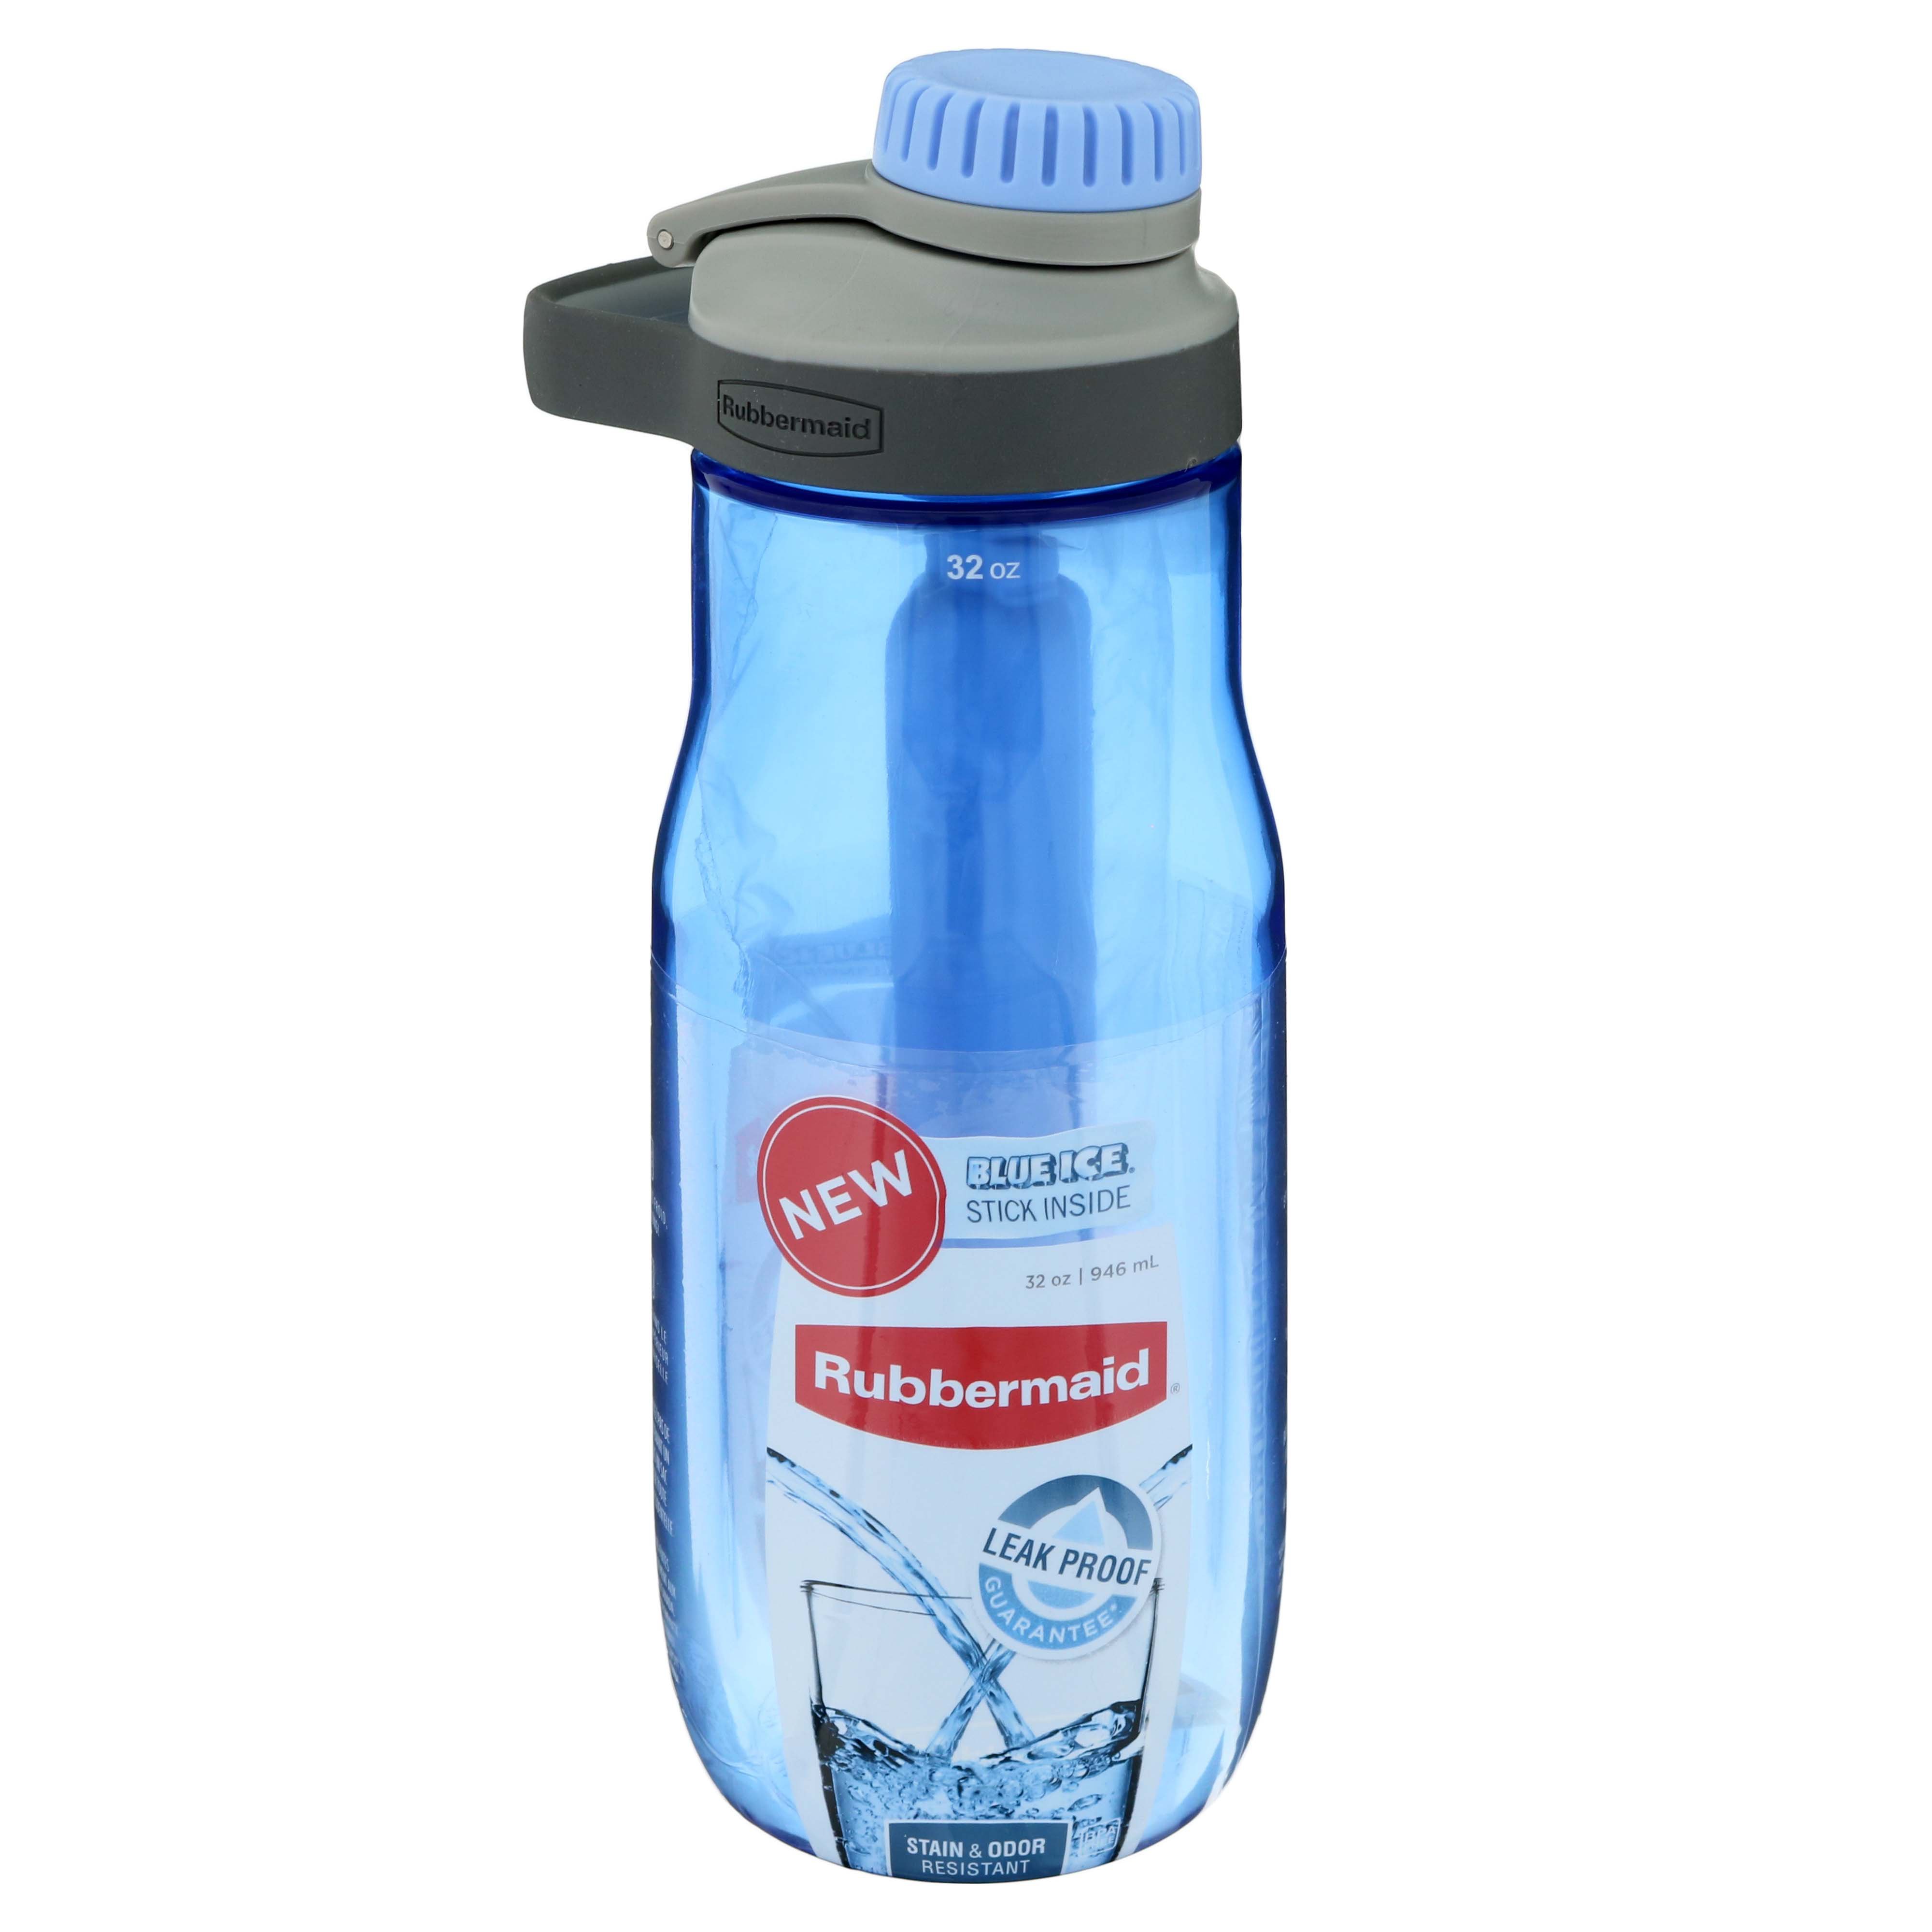 Rubbermaid Chug with Blue Ice Stick - Shop Travel & To-Go at H-E-B